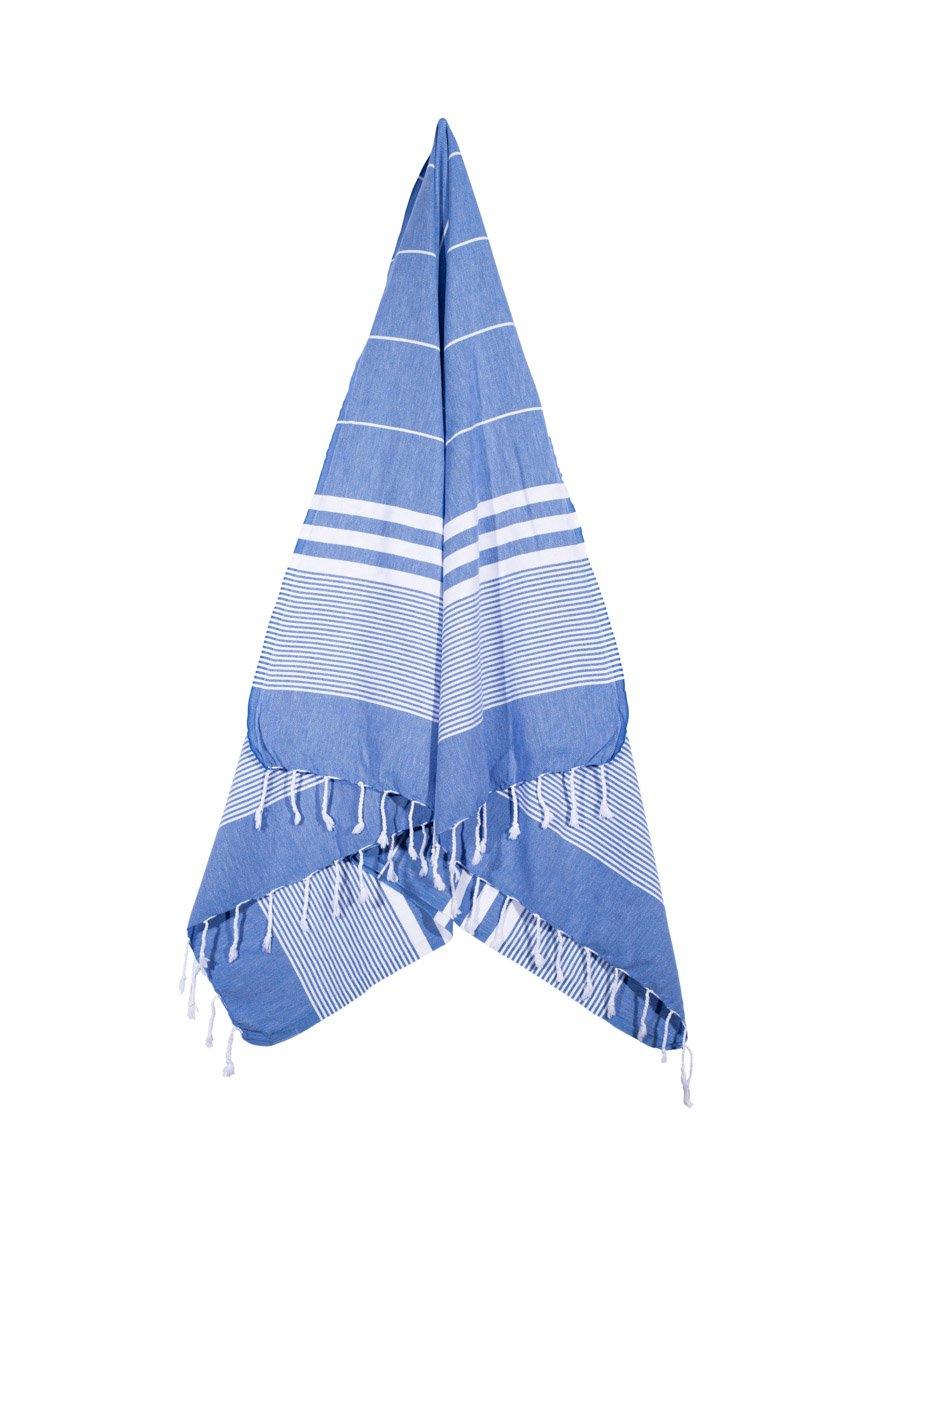 Kali - Blue and White Striped Quick Drying Towel Hanging